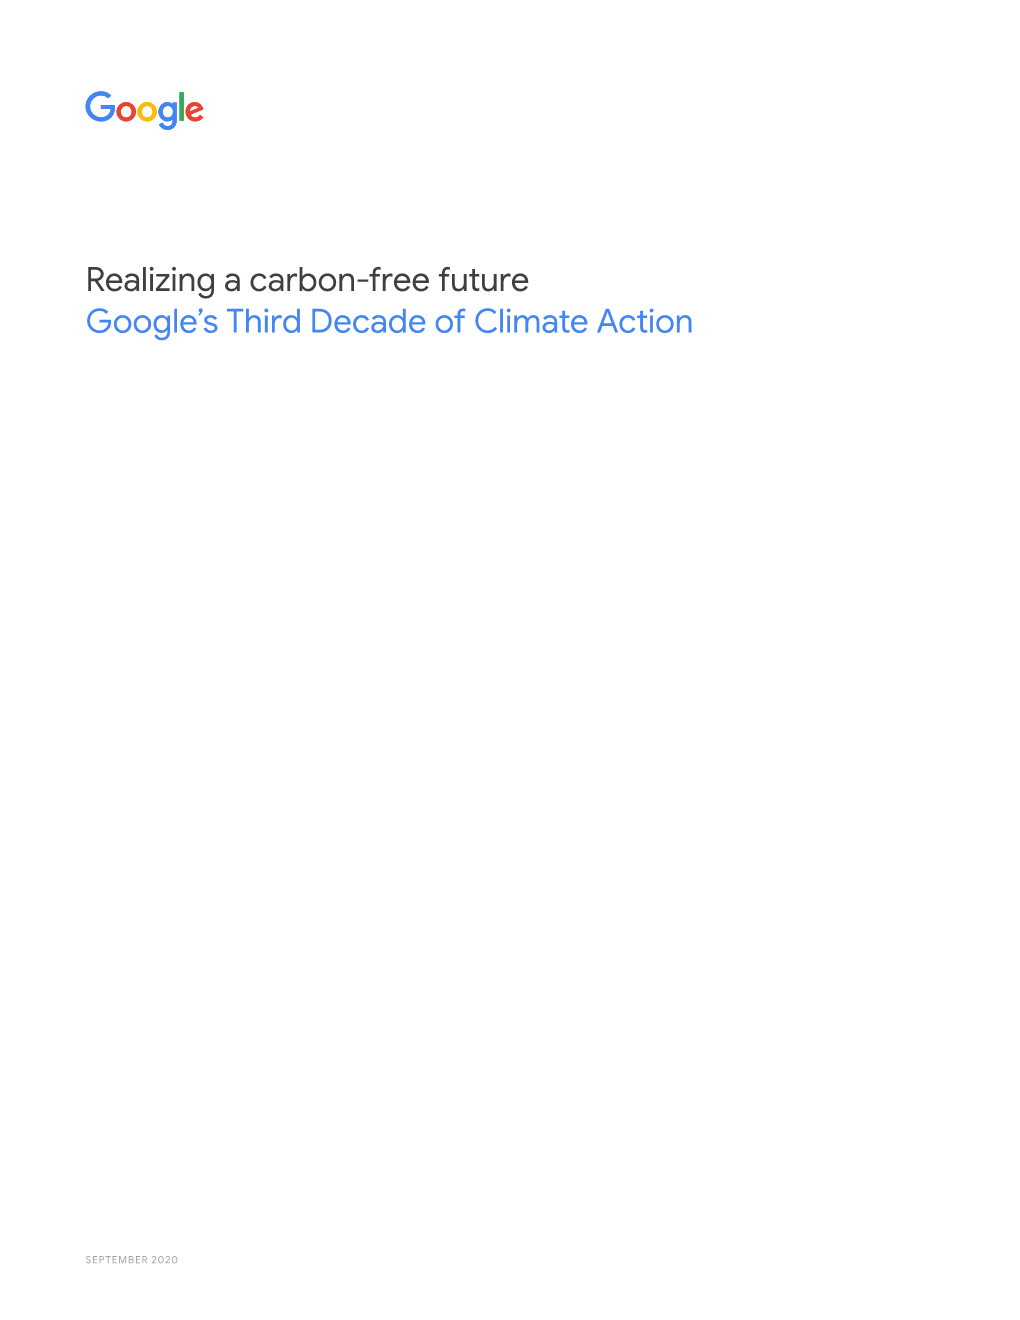 Realizing a Carbon-Free Future Google's Third Decade of Climate